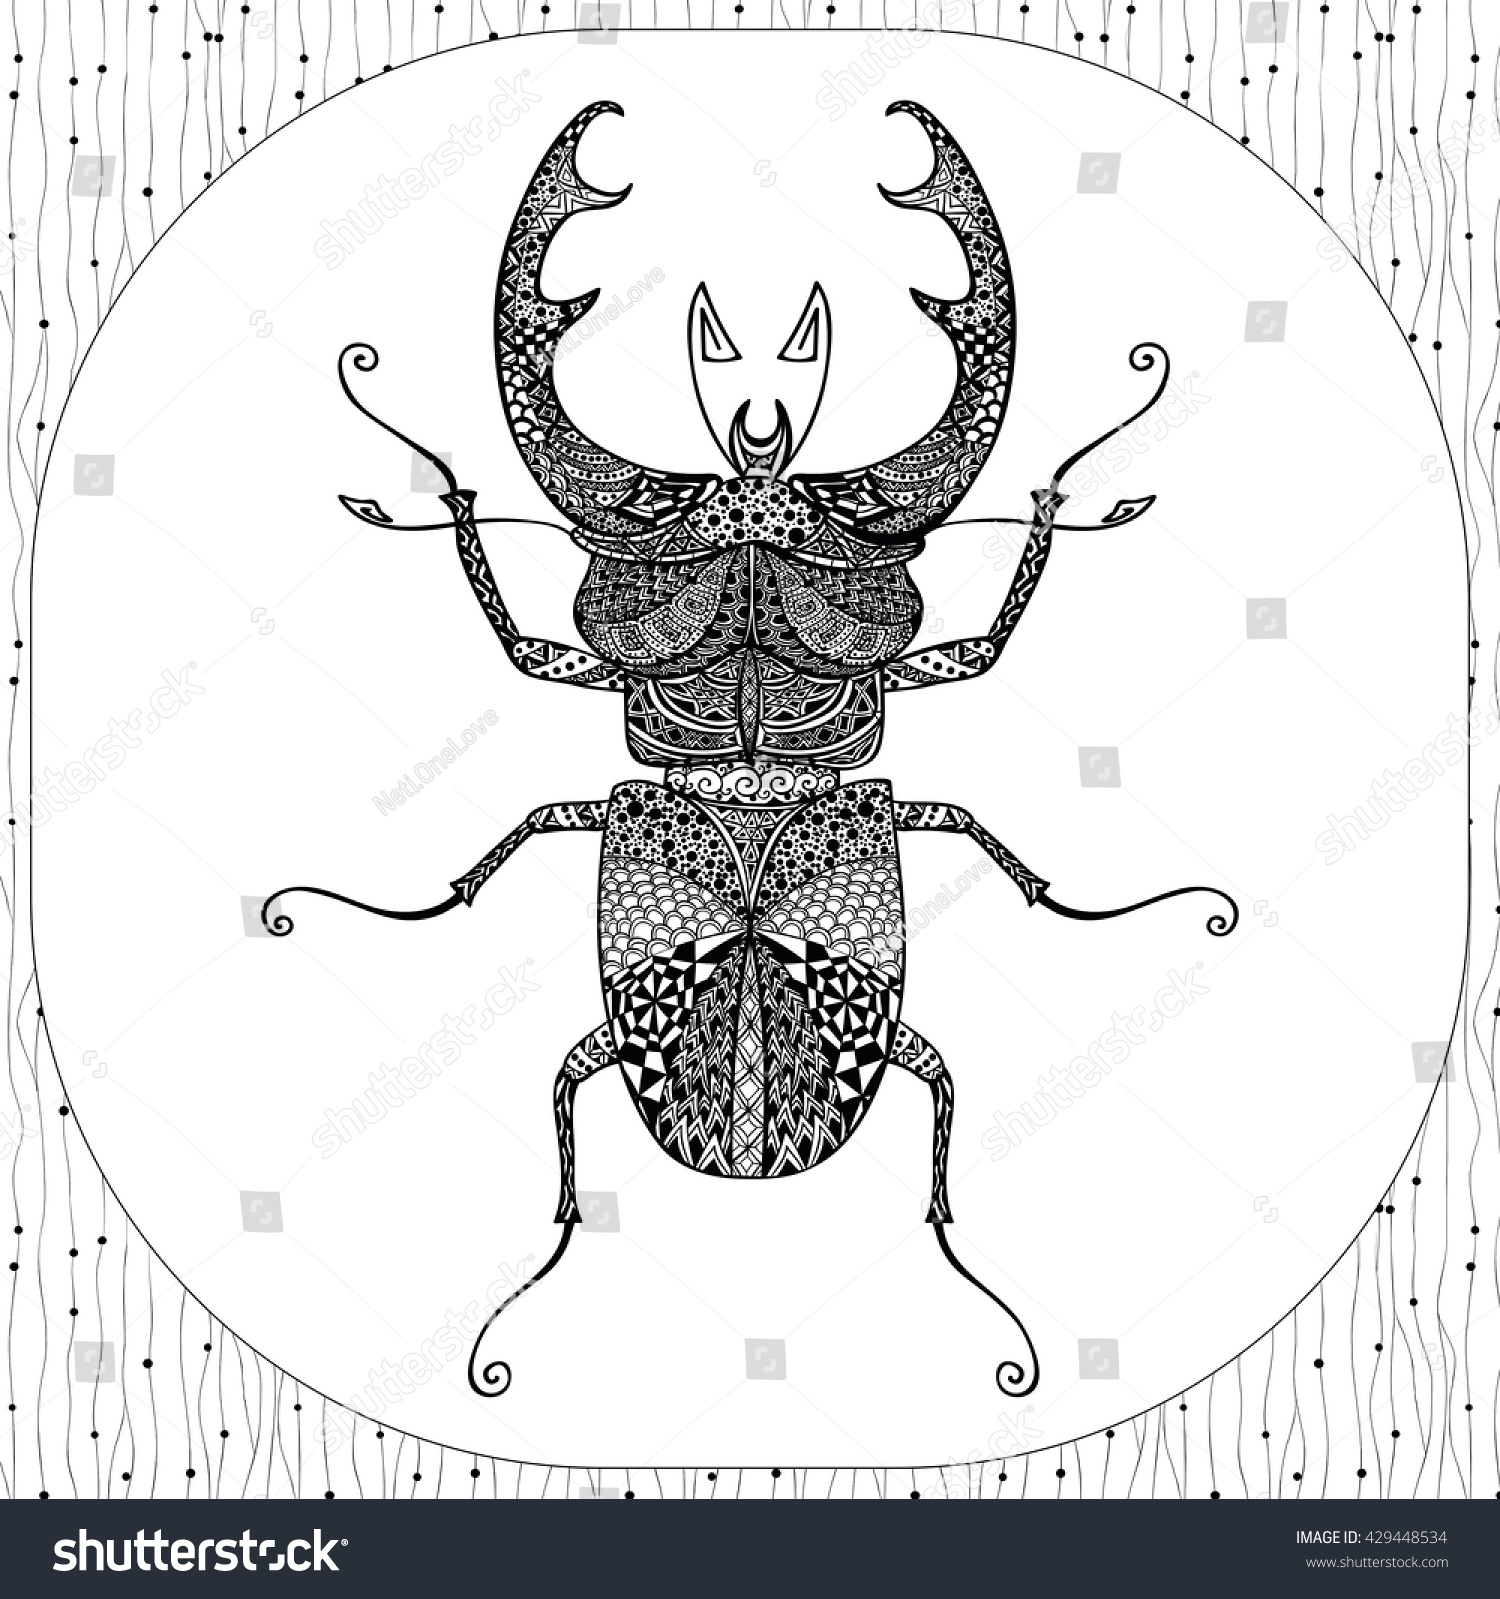 Download Coloring Page Decorative Black Stagbeetle Drawn Stock Vector Royalty Free 429448534